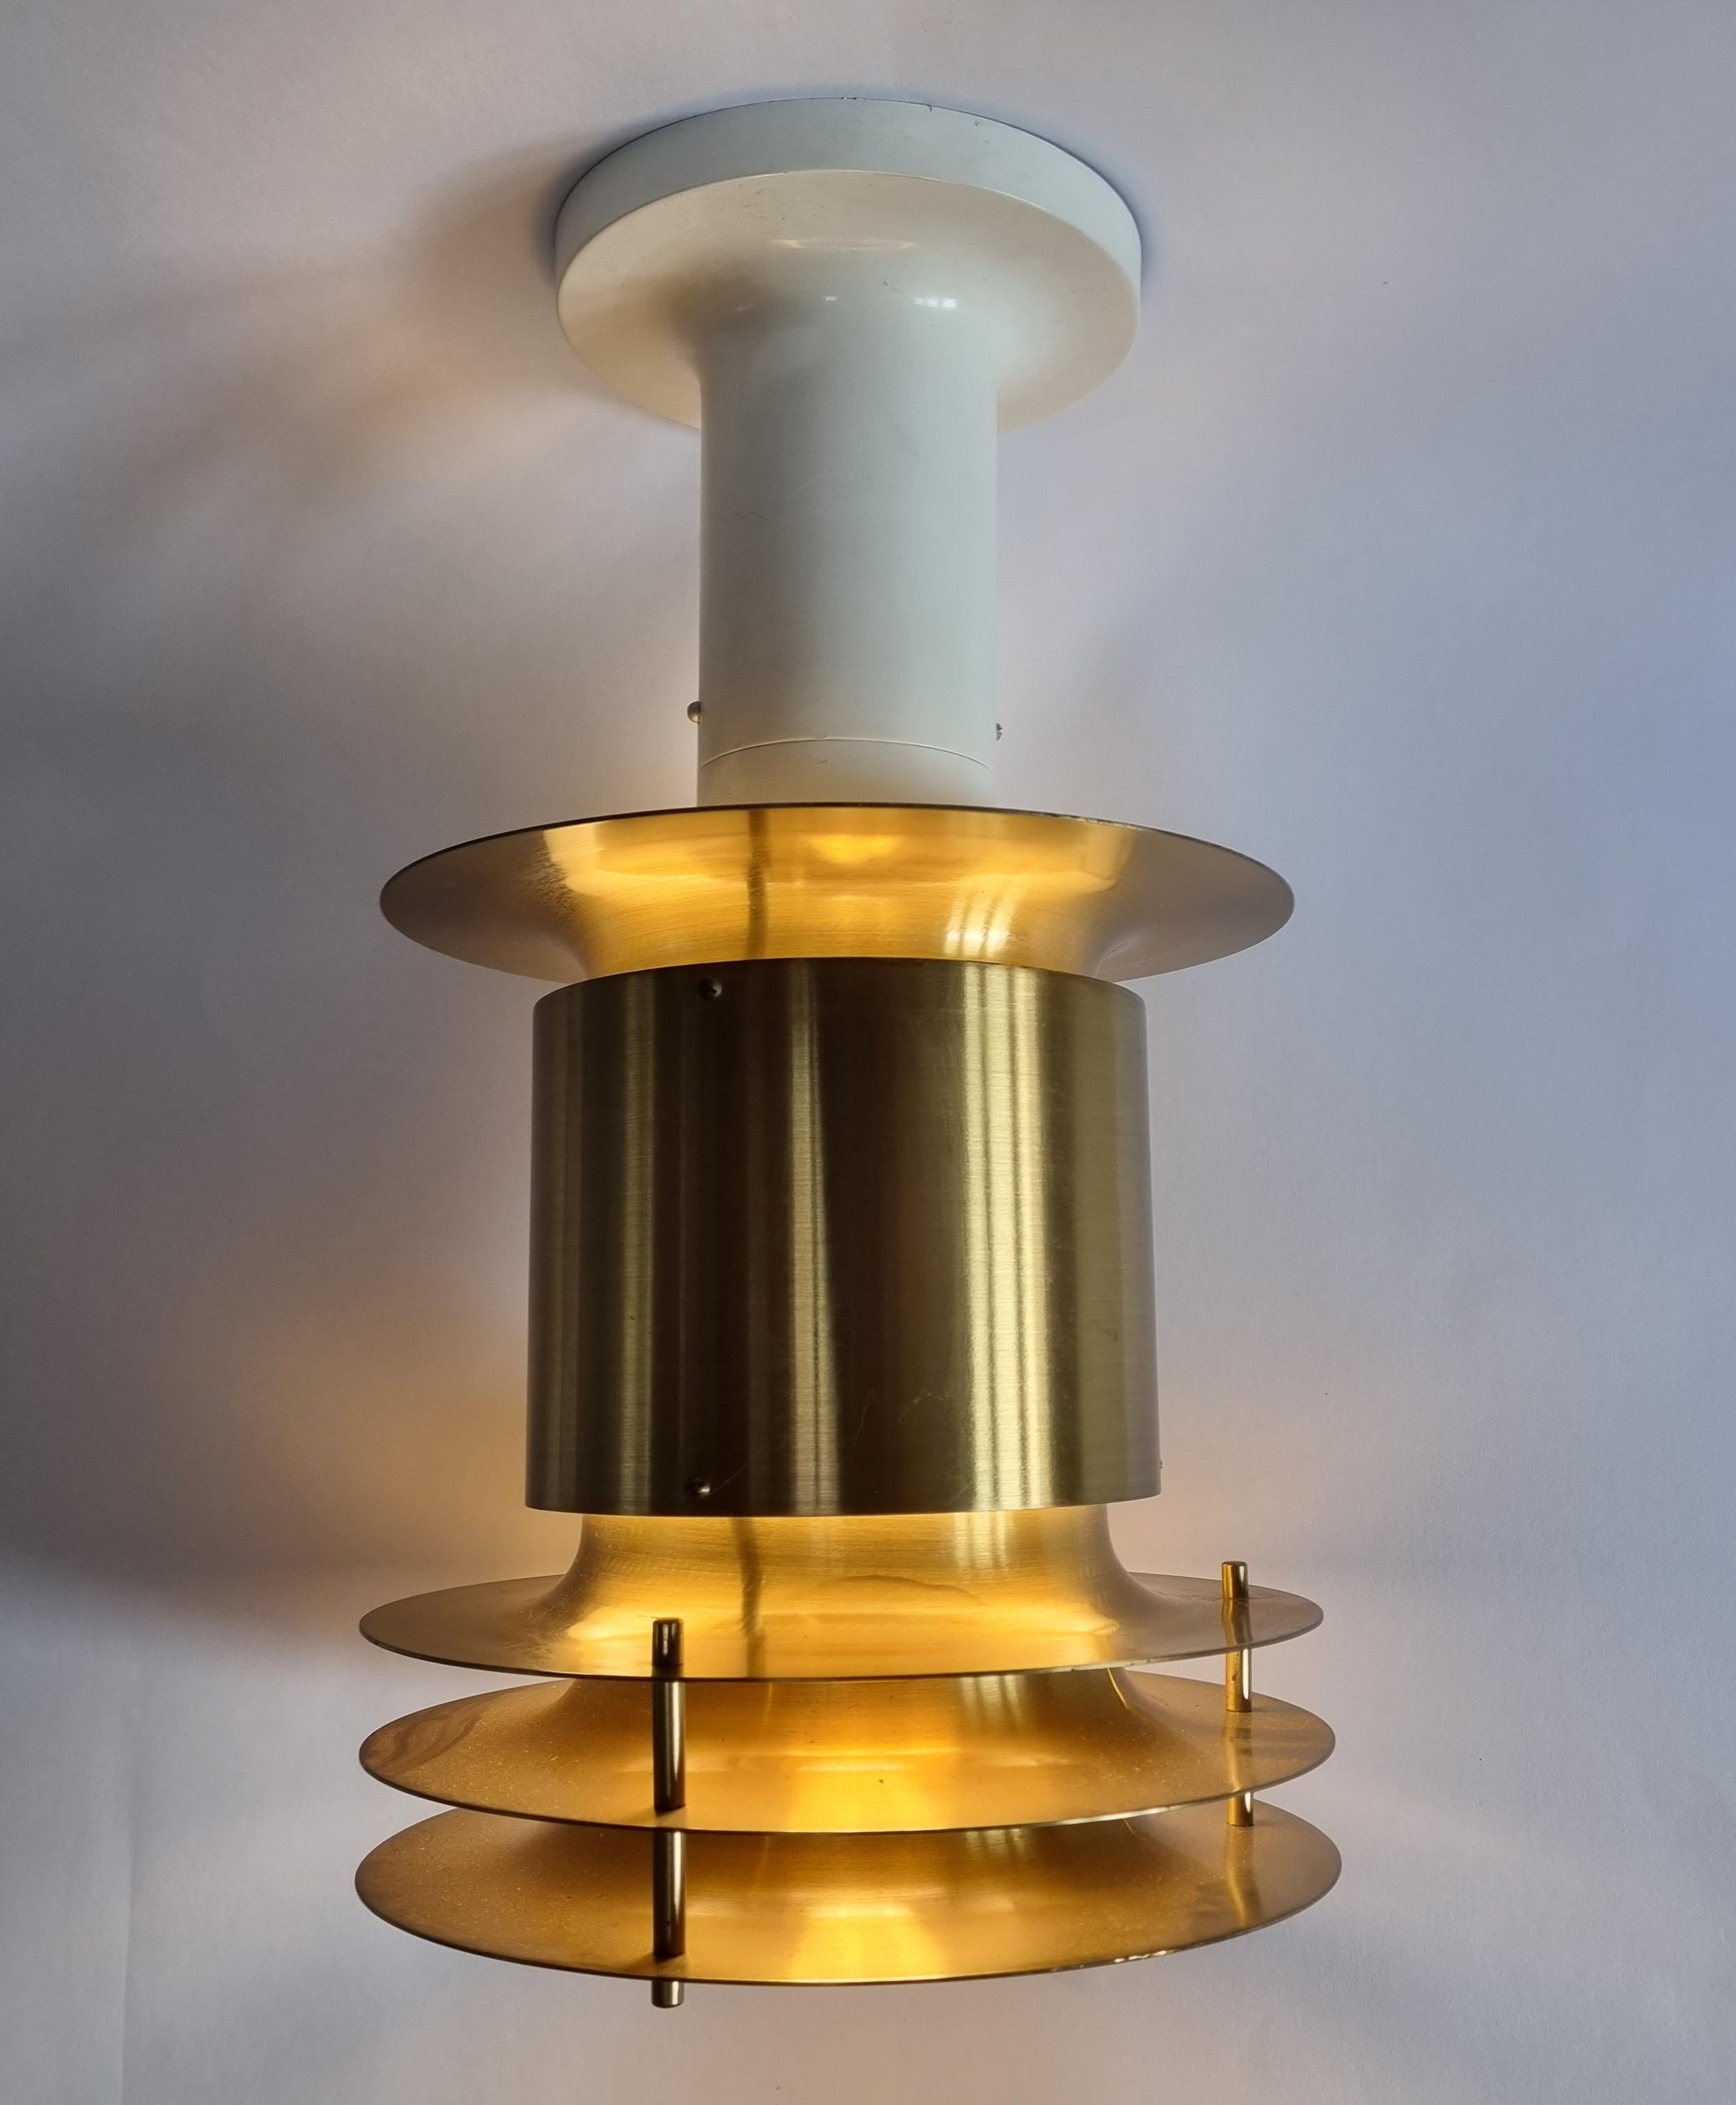 Lacquered Midcentury Rare Large Flush Mount, Ceiling or Table Lamp, Denmark, 1970s